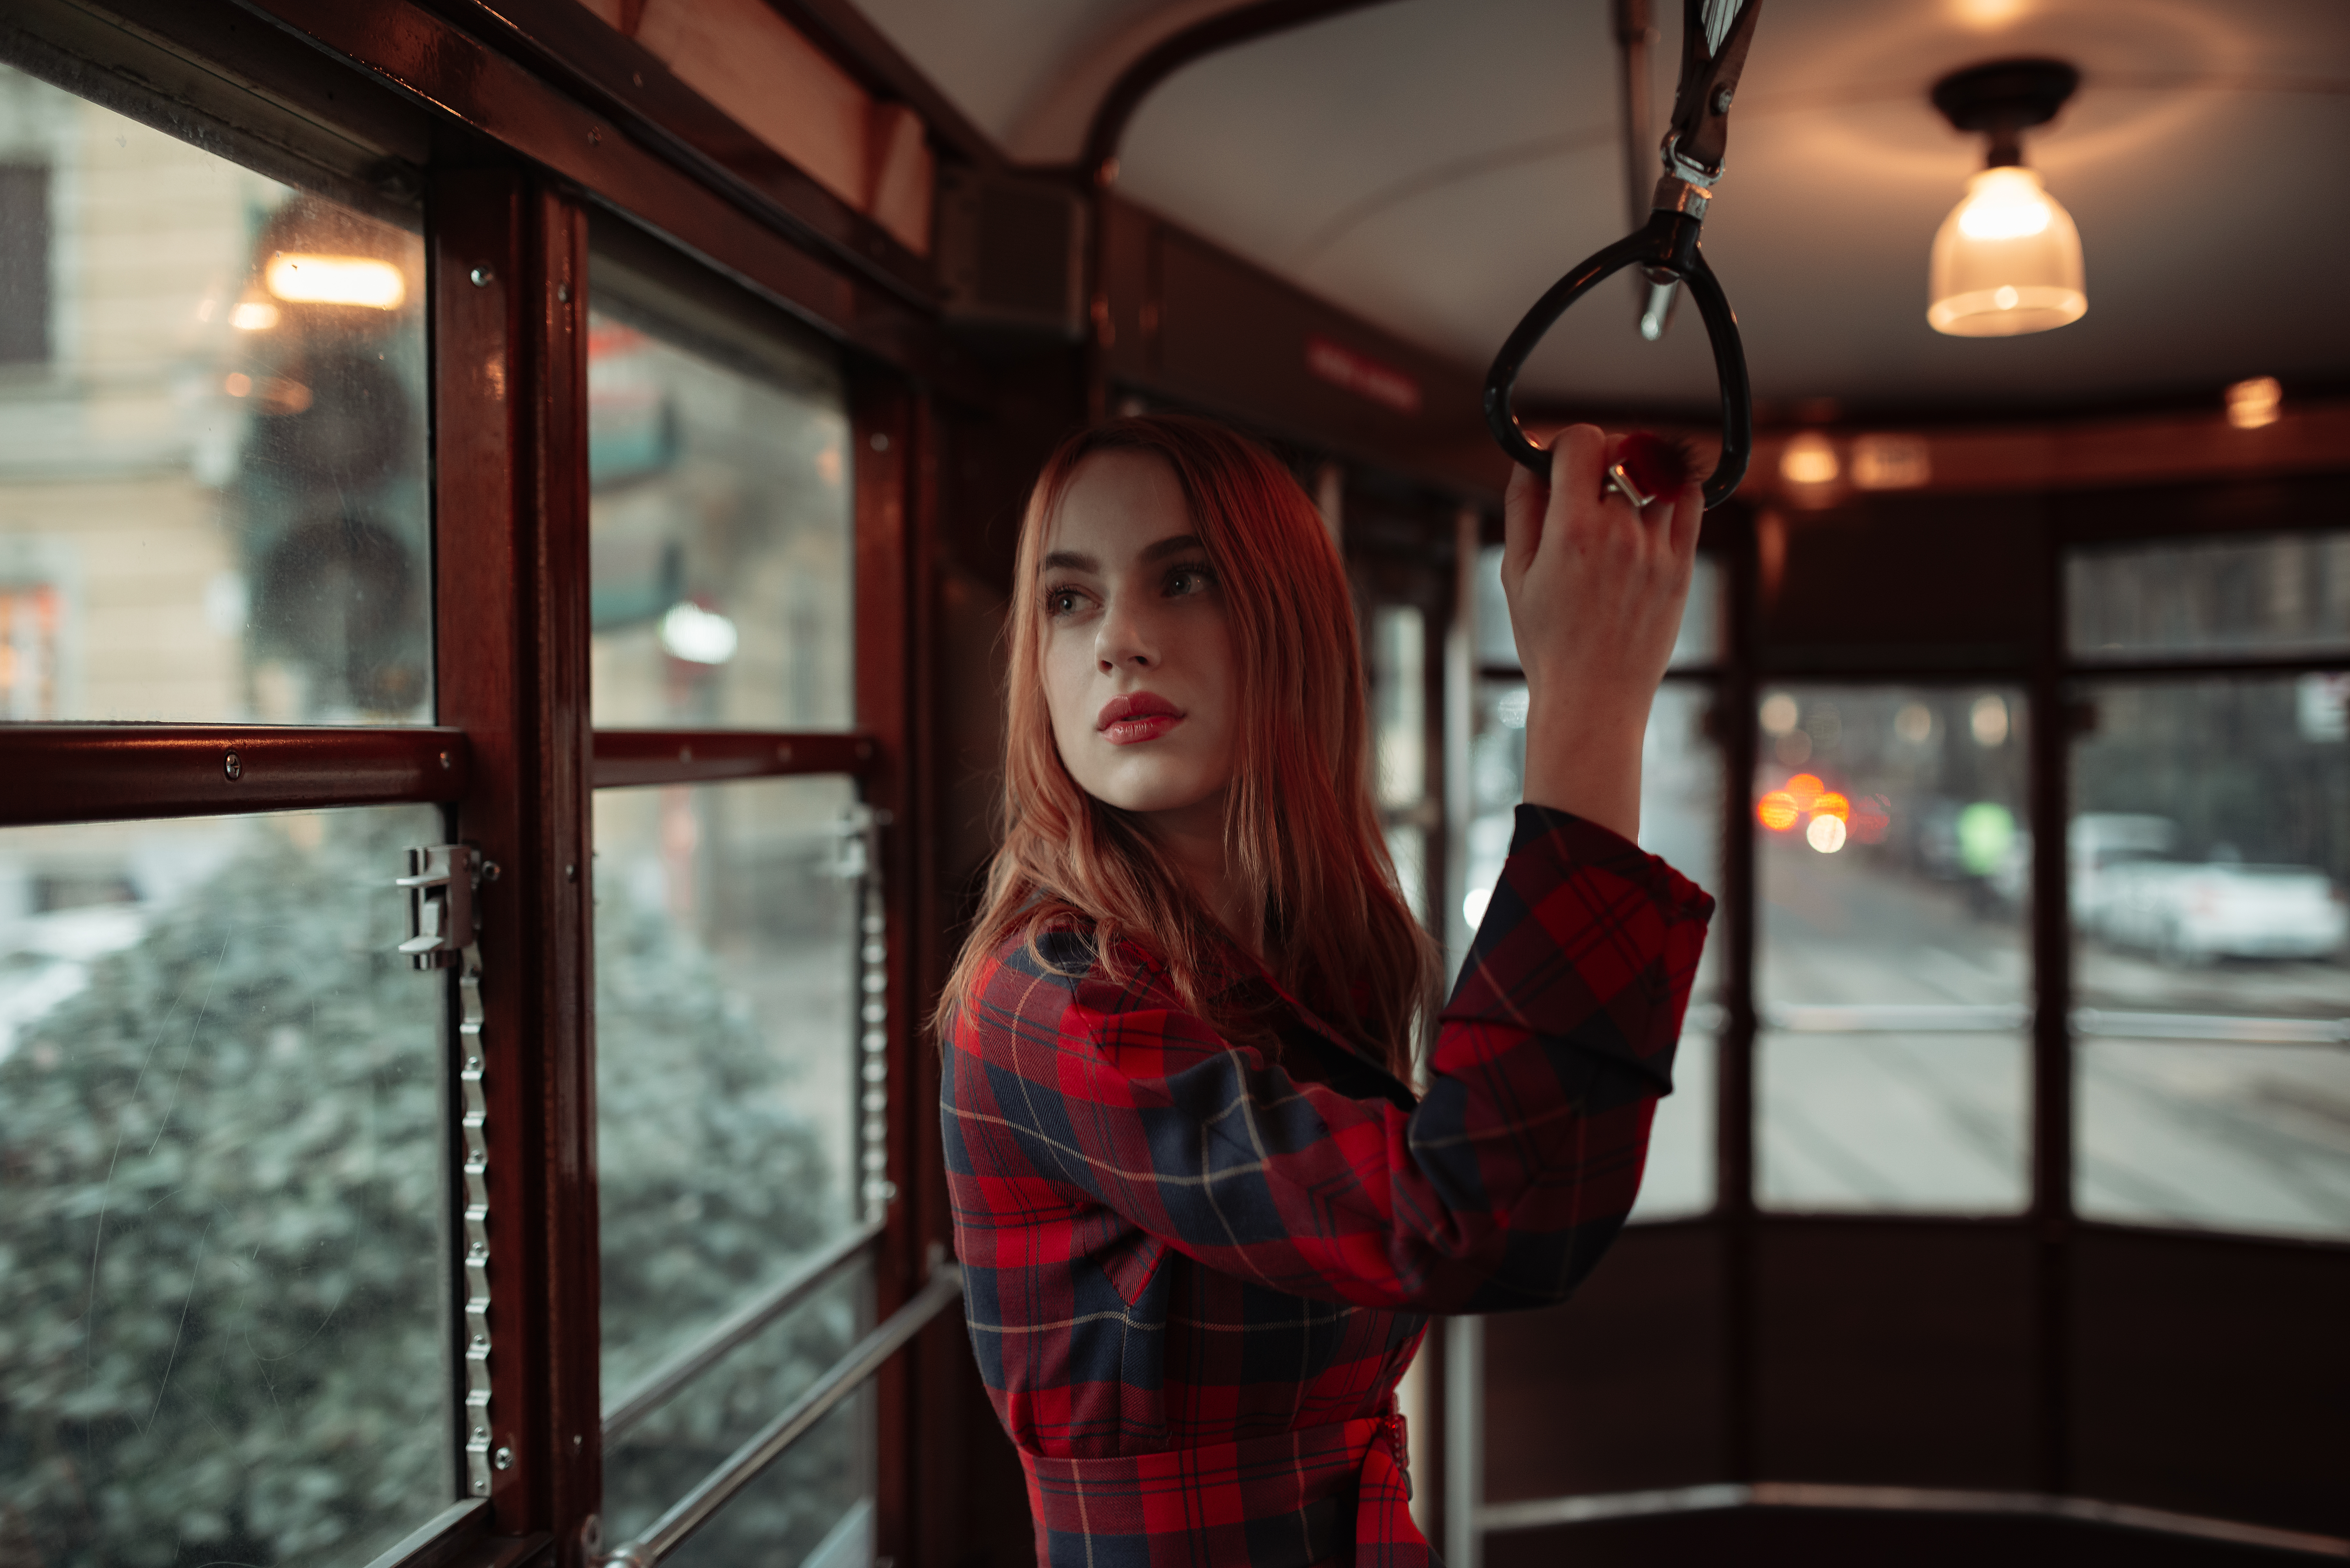 People 7320x4885 fashion Milan Nelb Rodrigues Italy women model redhead makeup red lipstick dyed hair looking out window plaid dress